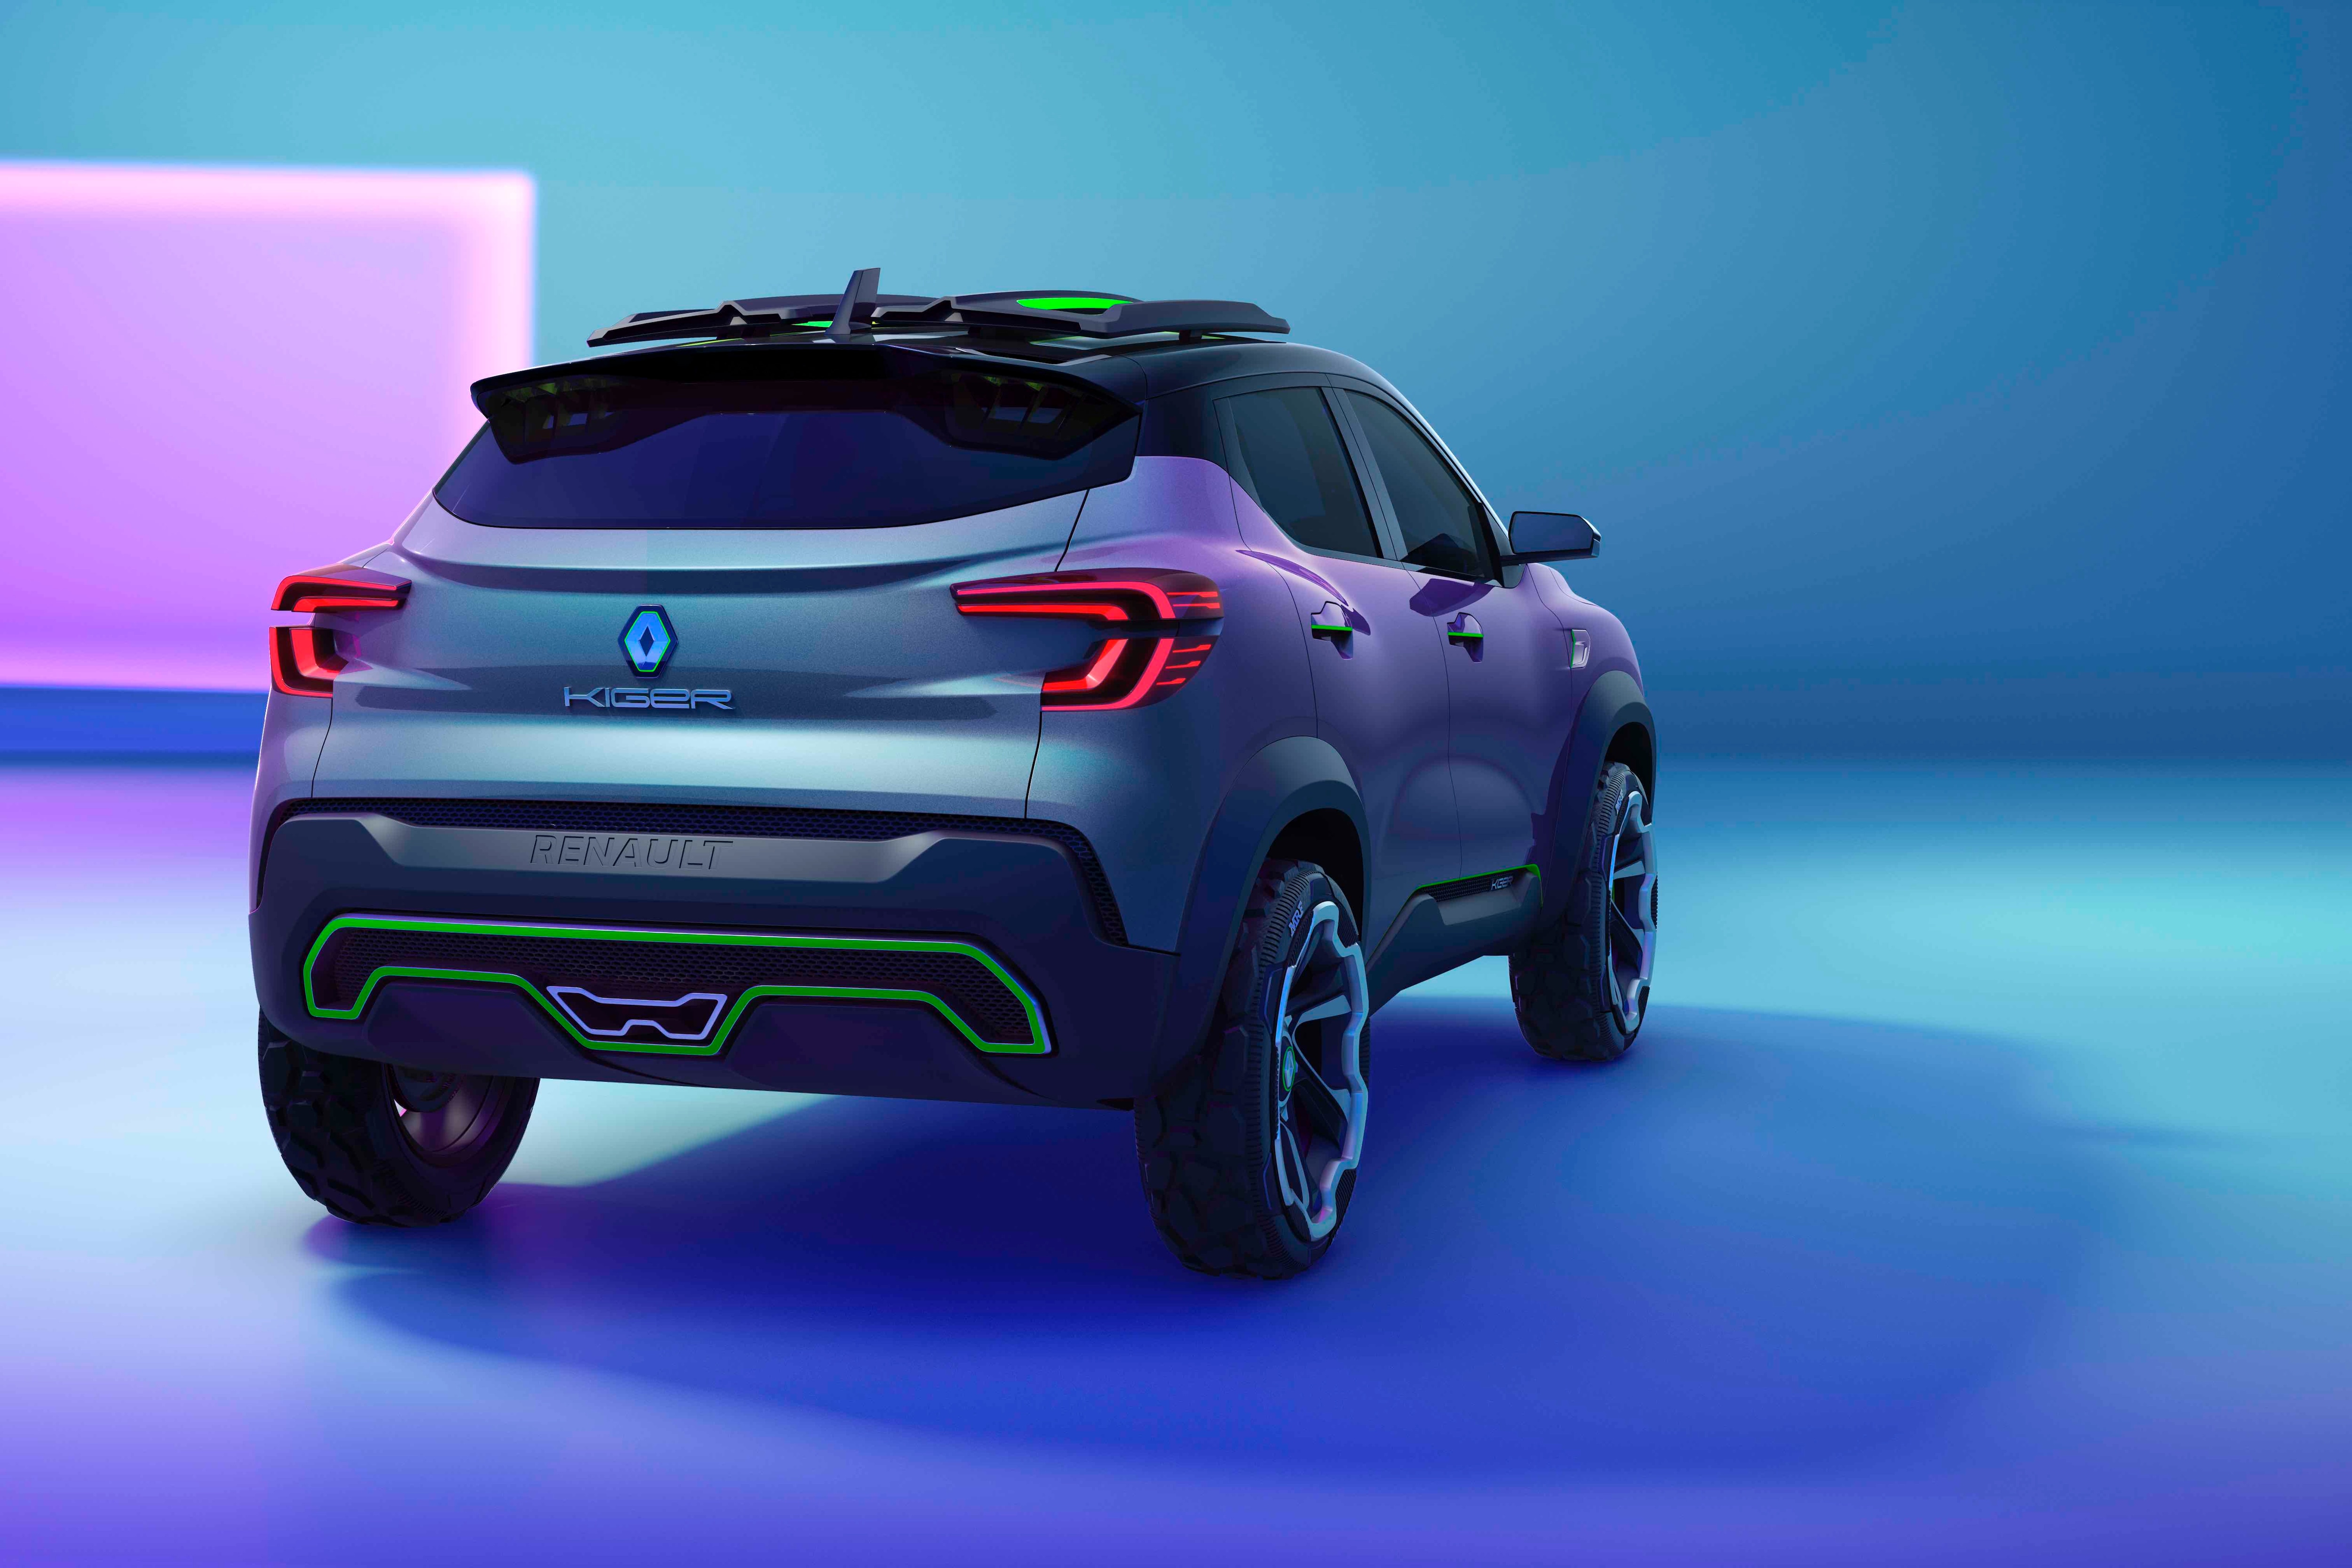 Renault Kiger in showcar form looks appealing, thanks to its blue and purple hues.